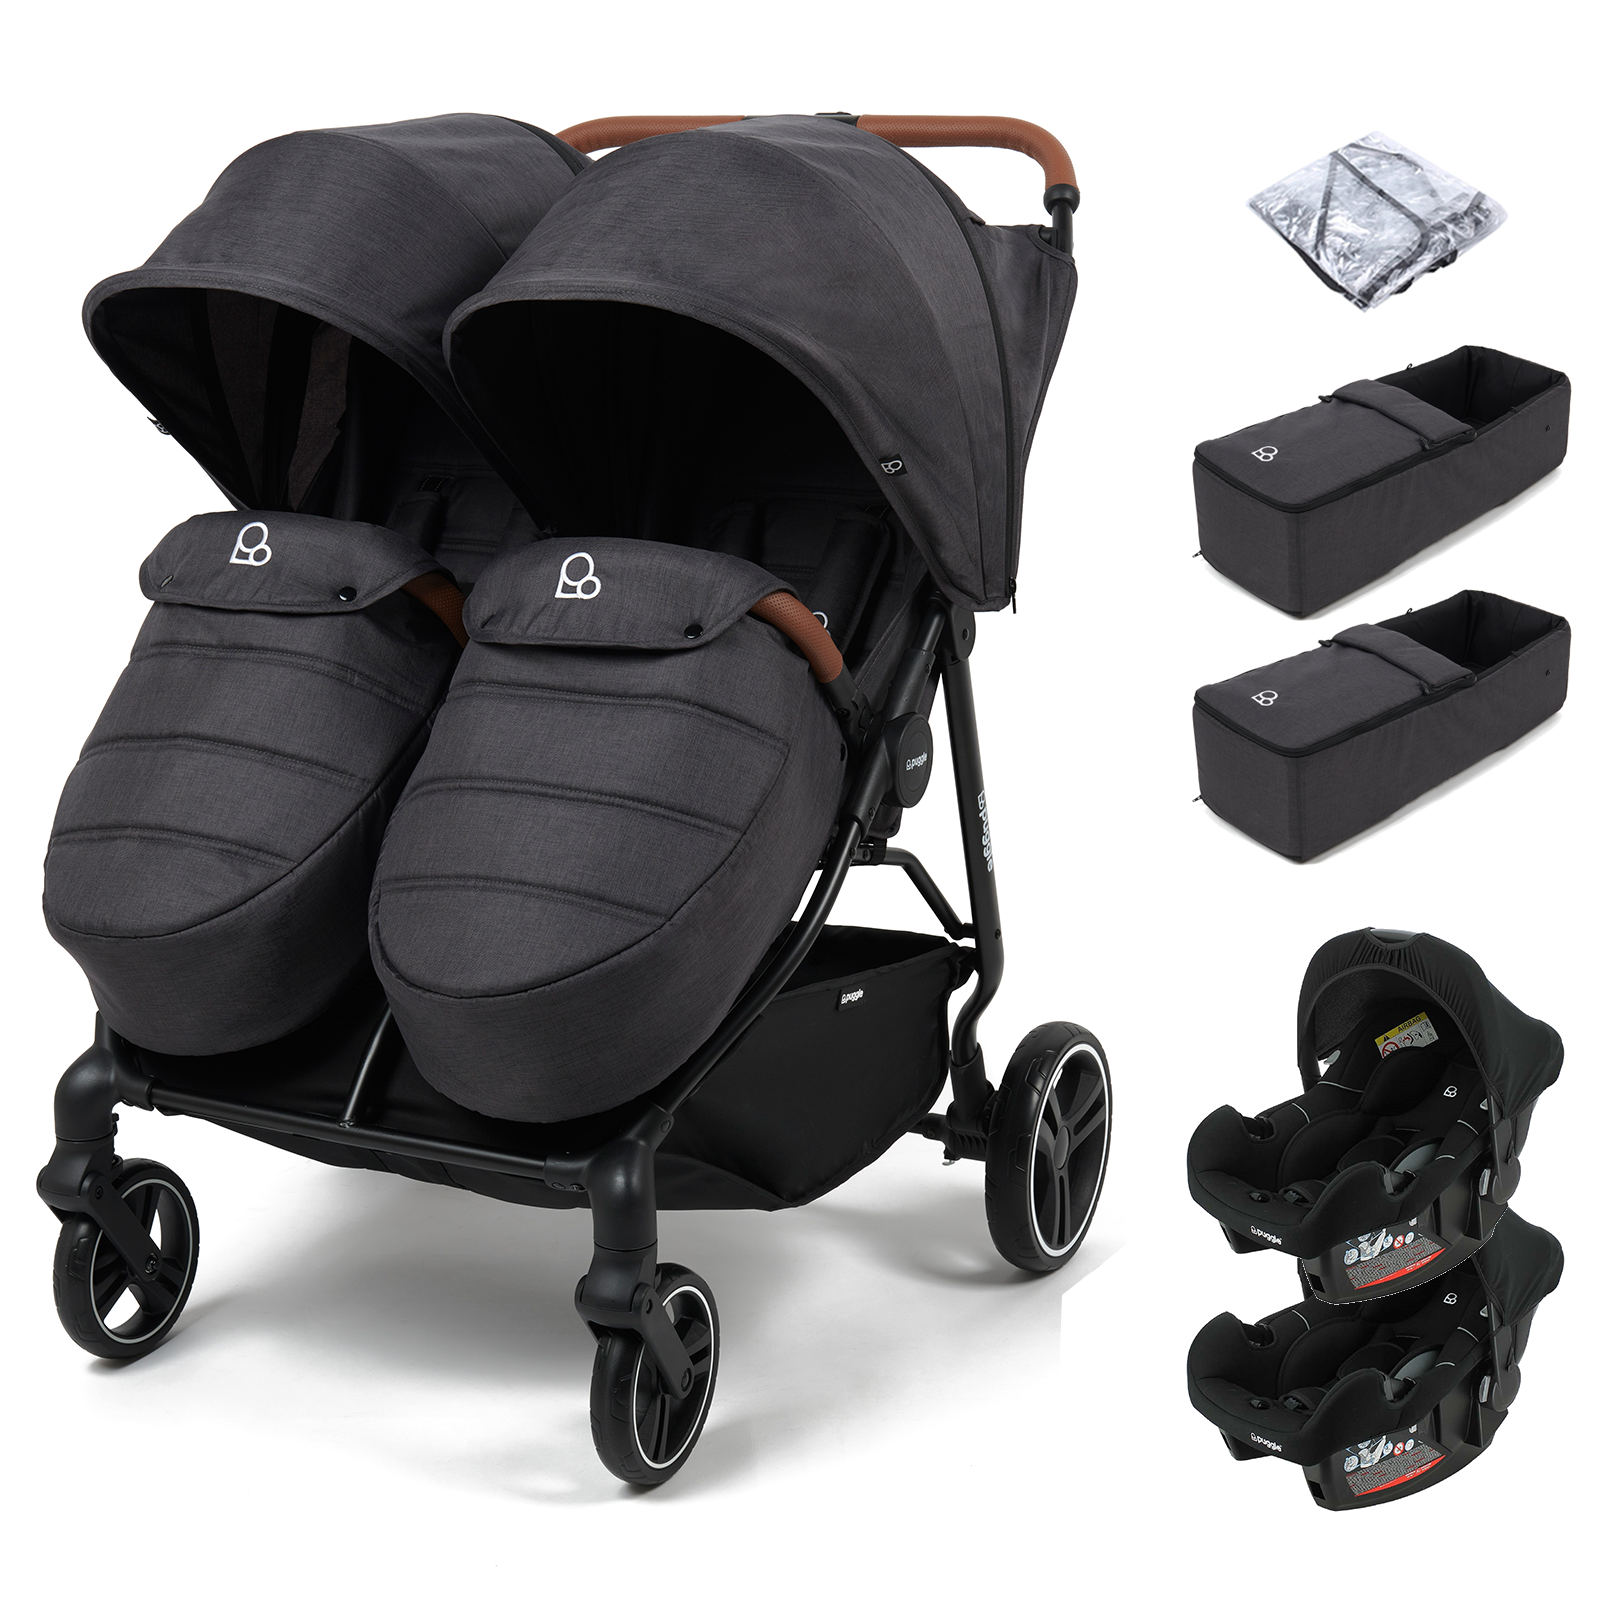 Puggle Urban City Easyfold Twin (Alston Car Seat) Travel System Bundle with +2 Soft Carrycot - Slate Grey